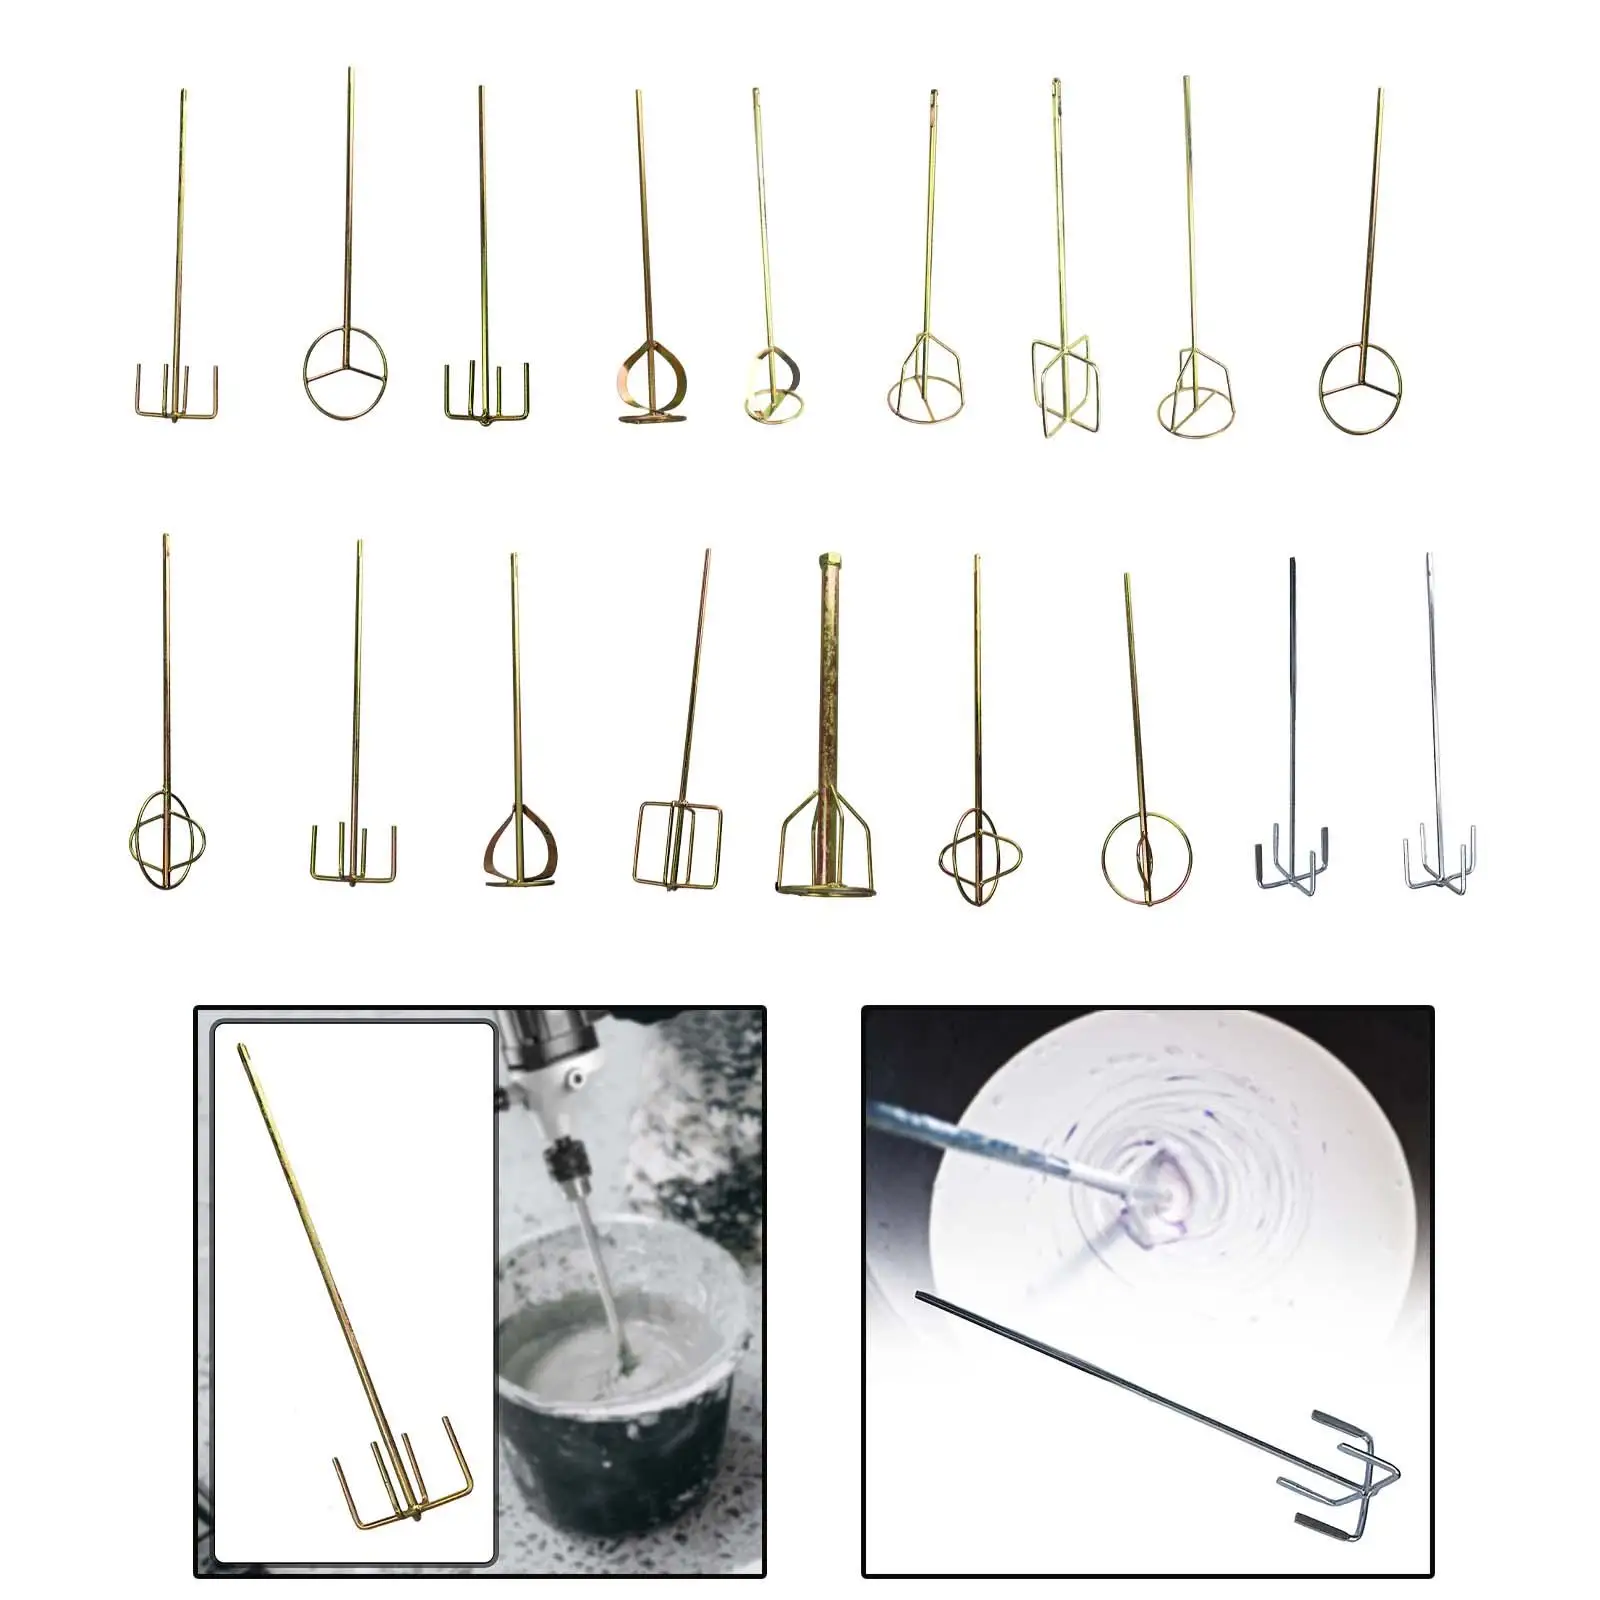 

Electric Mixer Paint Mixing Rod Mixing Stick Drill Attachment Long Mixing Tool for Grout Epoxy Mixer Liquids Paint Concrete